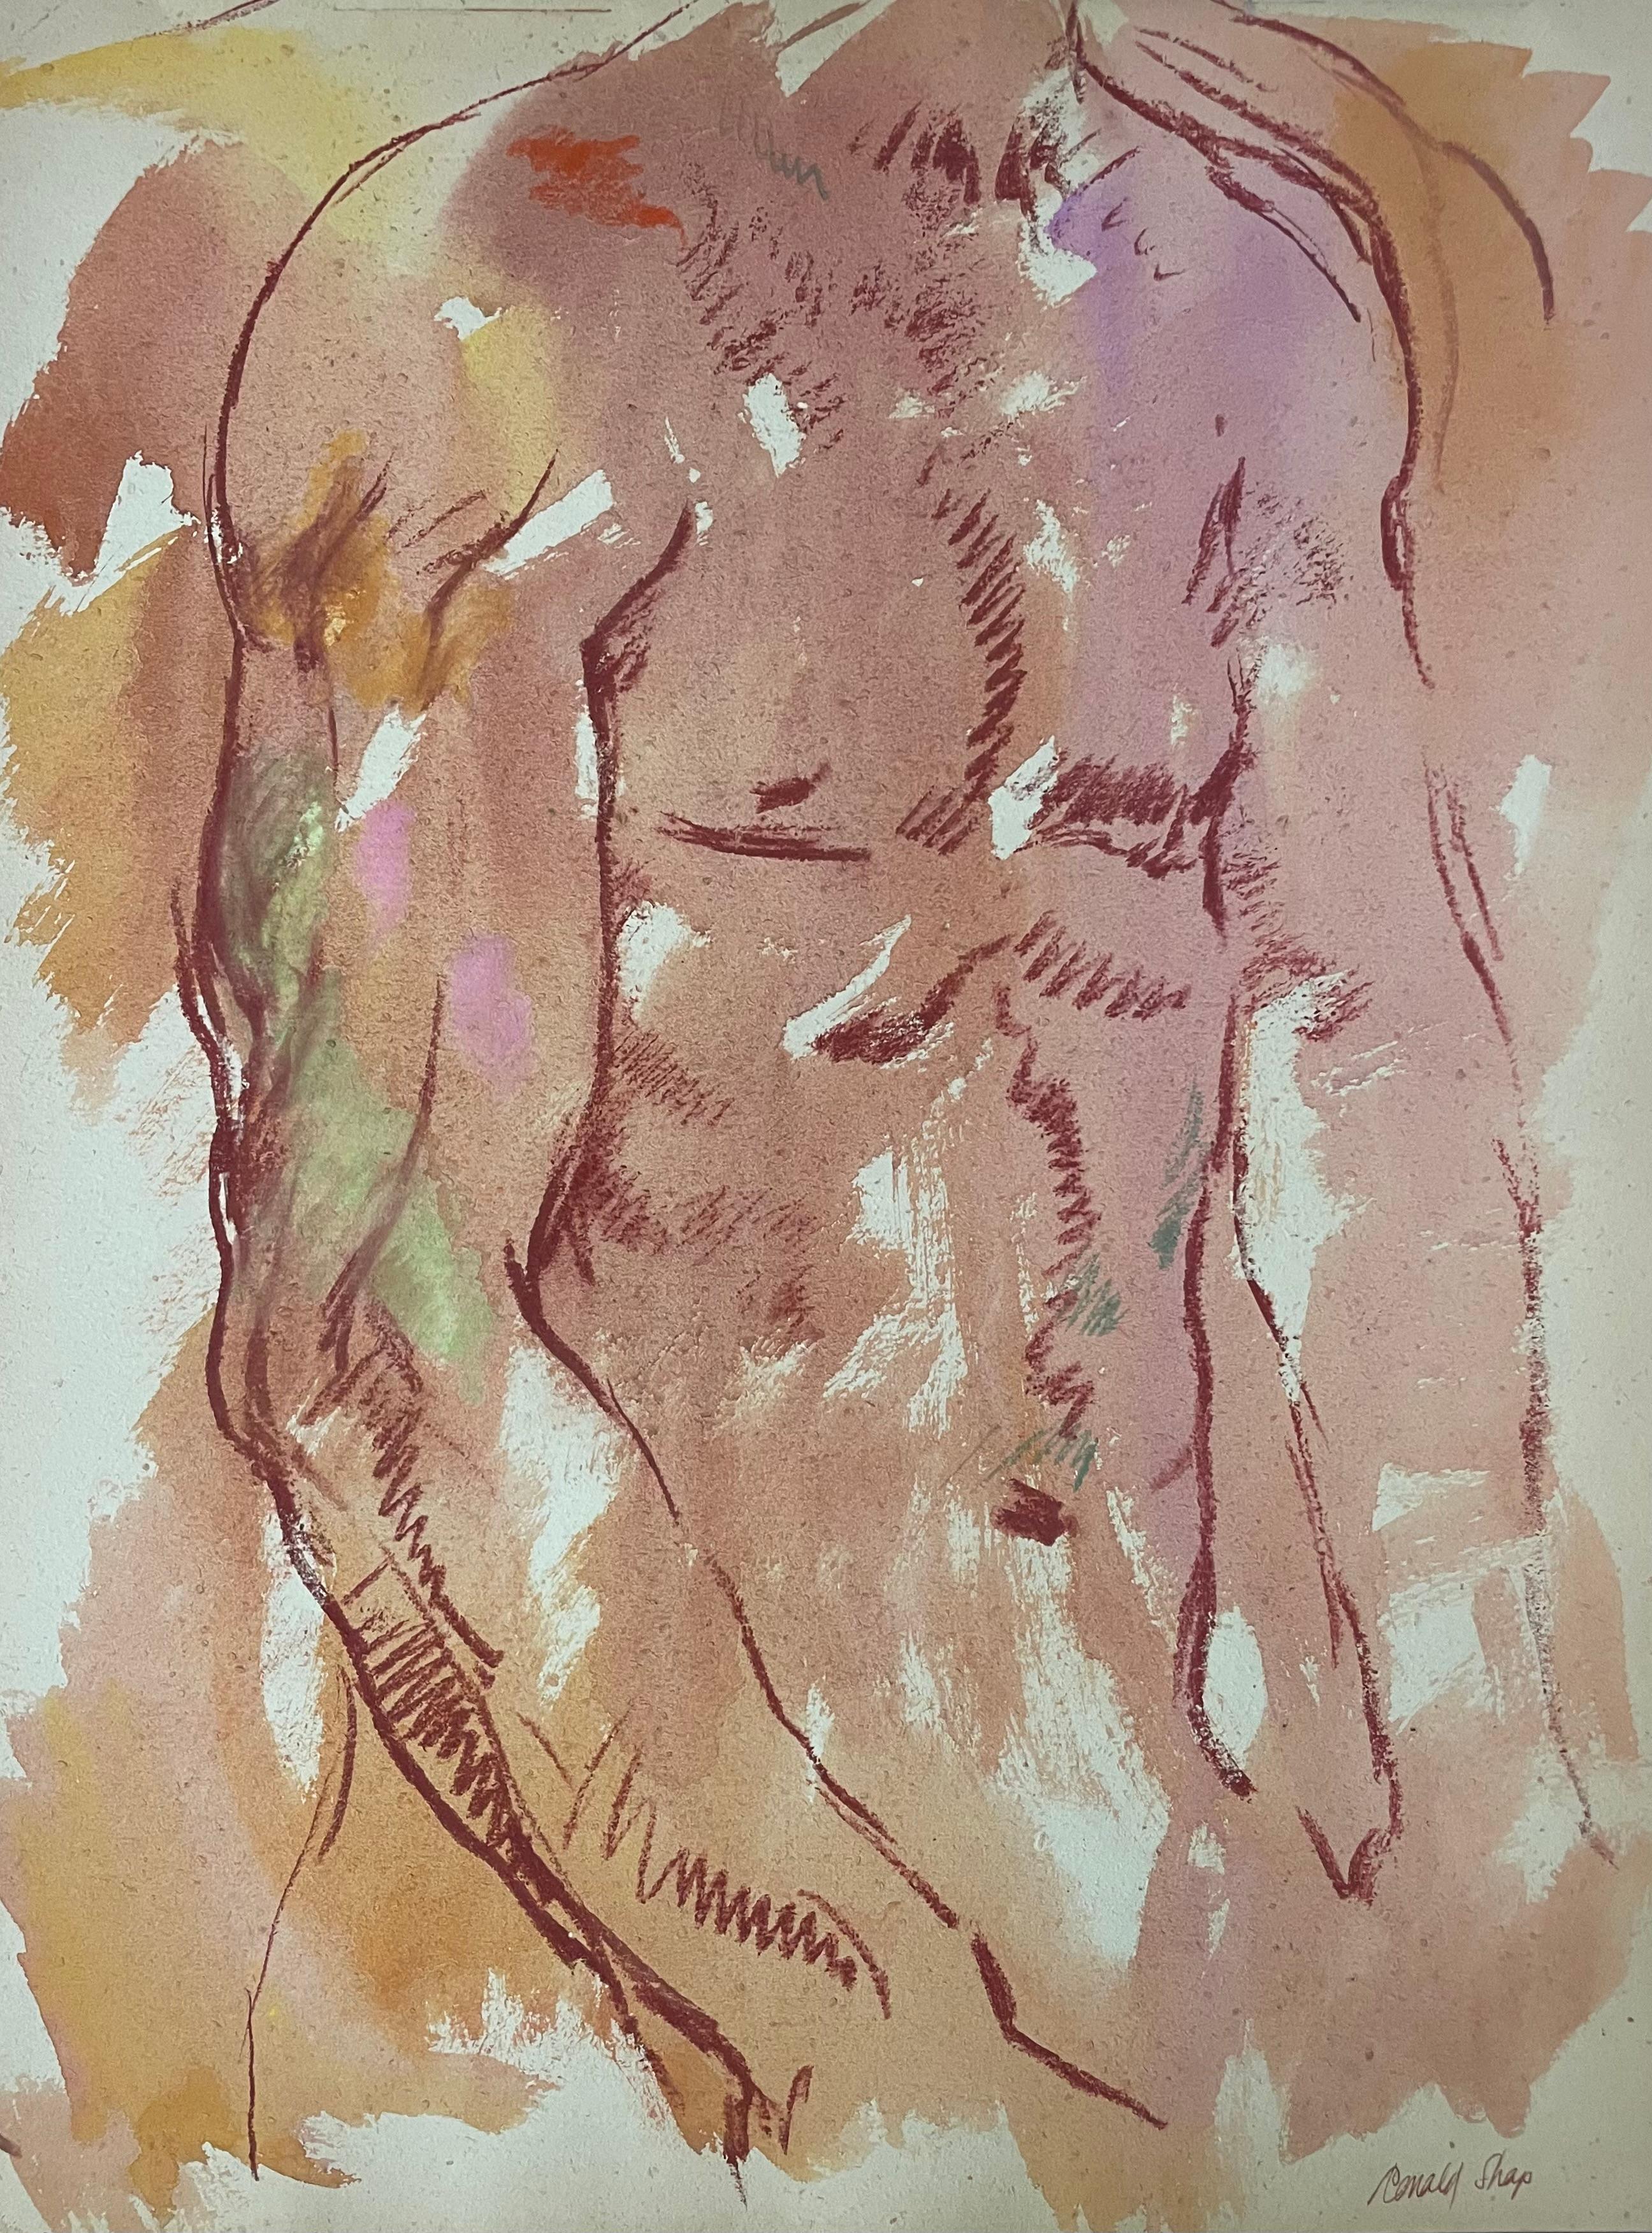 Original oil pastel and gouache figure drawing by celebrated, twentieth-century California landscape painter, Ronald Shap. Sketch of torso of a nude man. Beautiful peach washes with green and pink. 18x24 inches. Signed.

Indentations from artist's